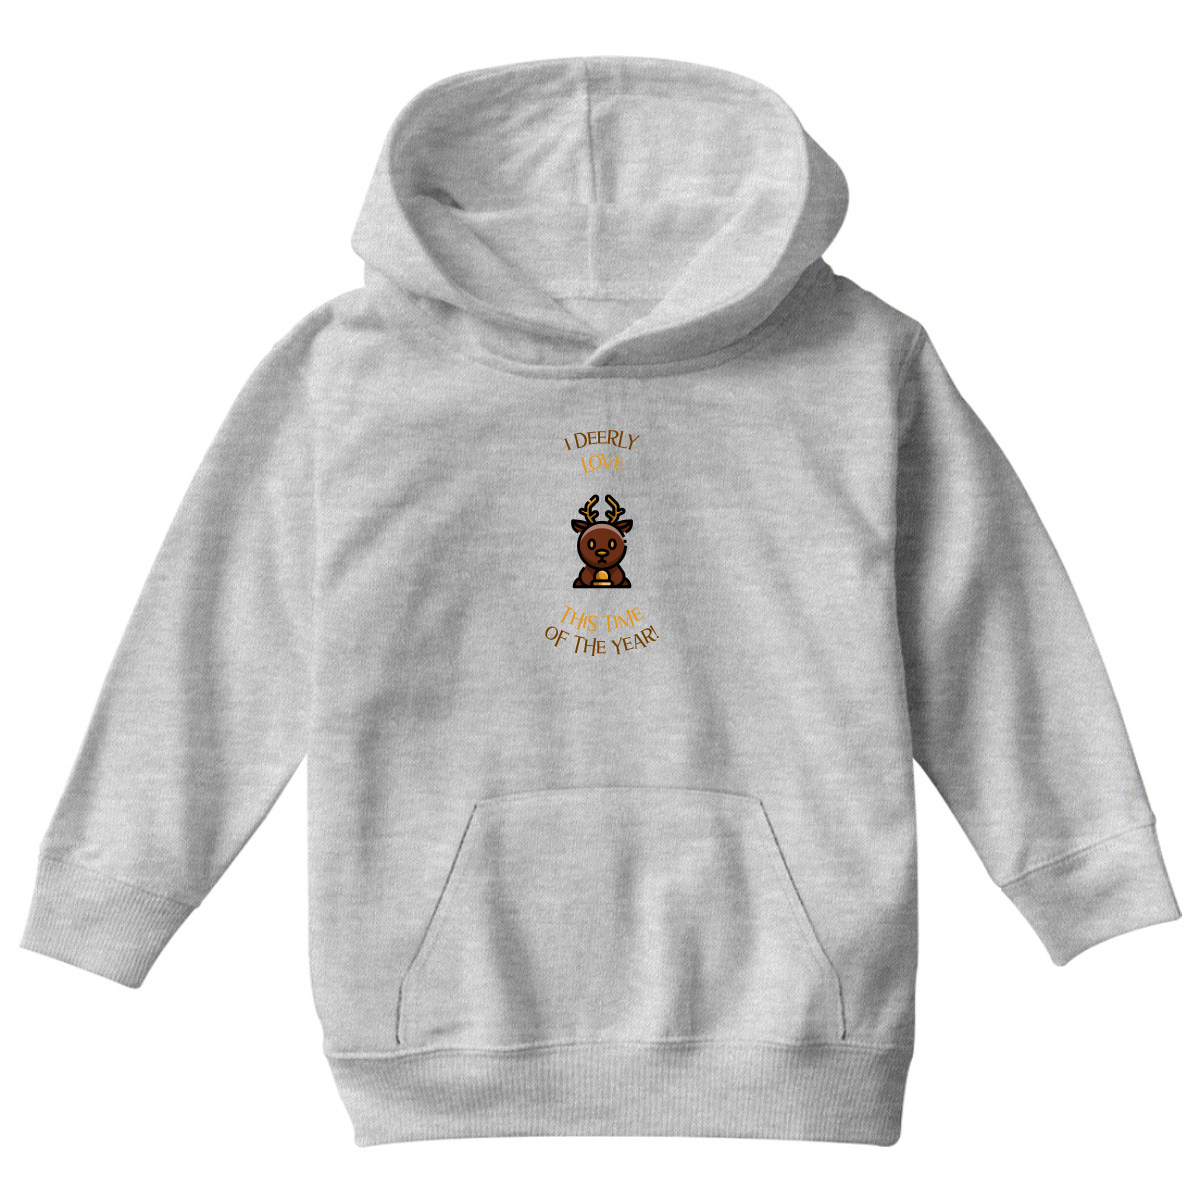 I Deerly Love This Time of the Year! Kids Hoodie | Gray